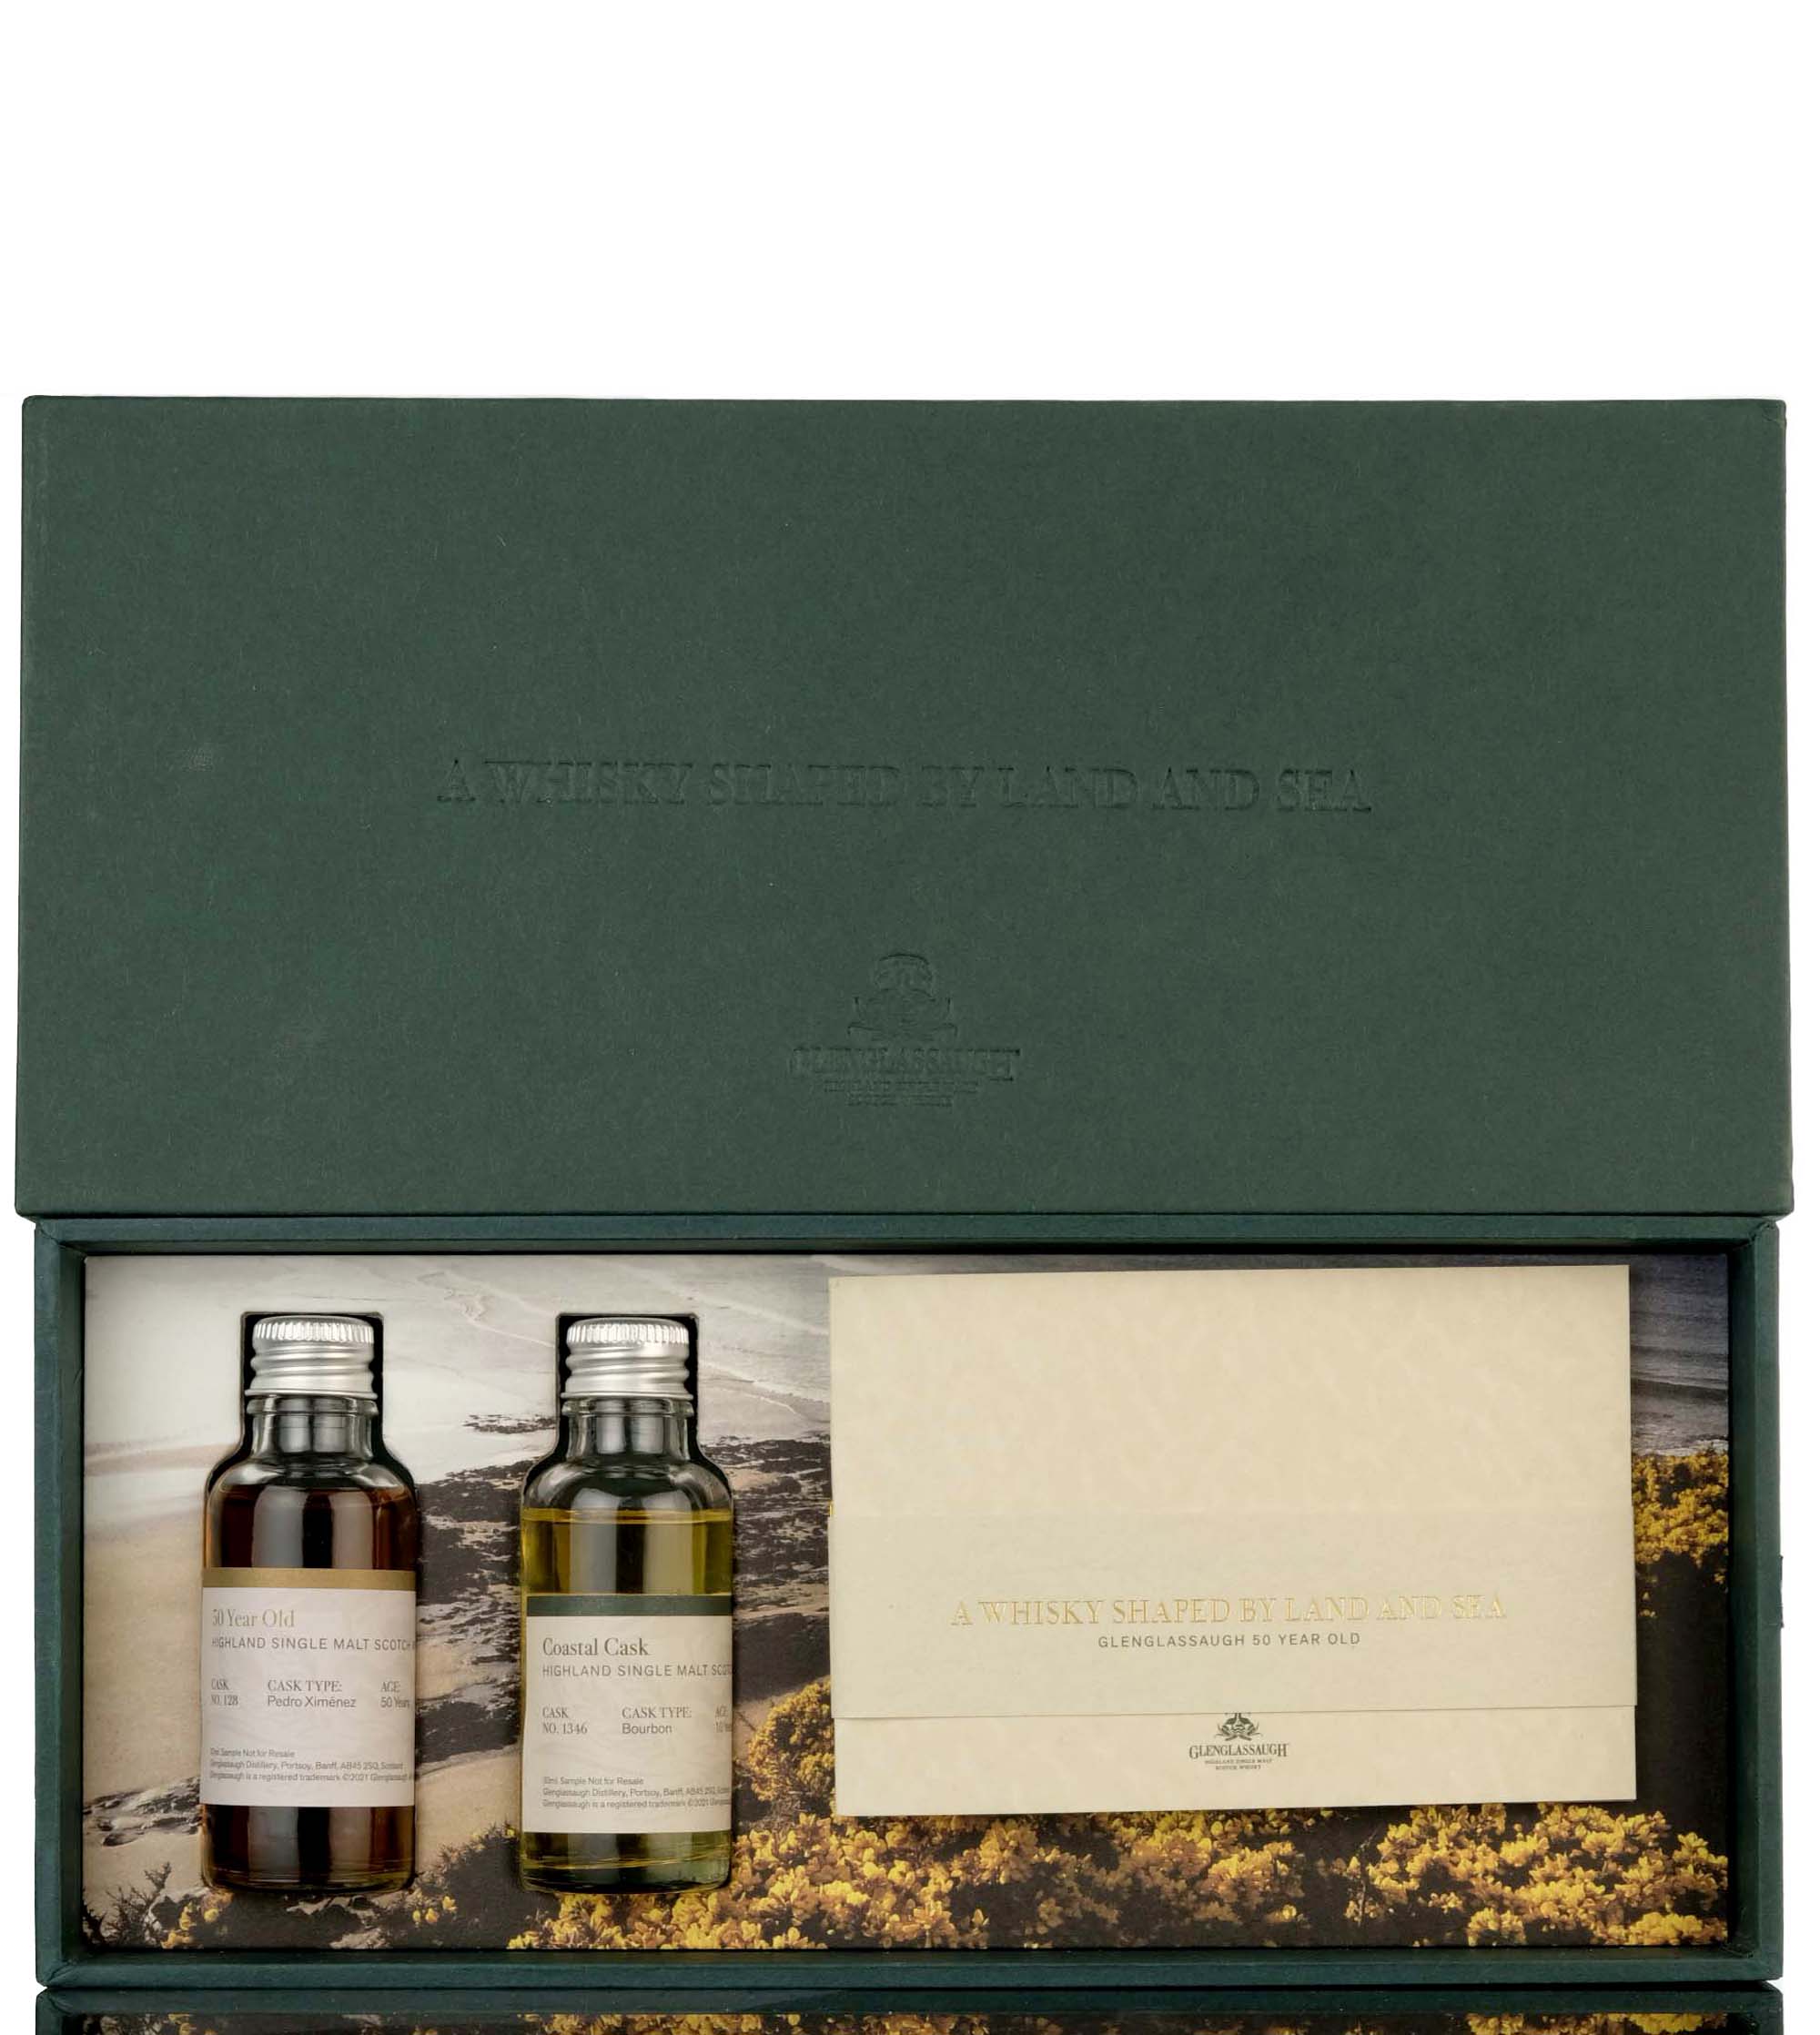 Glenglassaugh Official Trade Pack - 10 & 50 Year Old